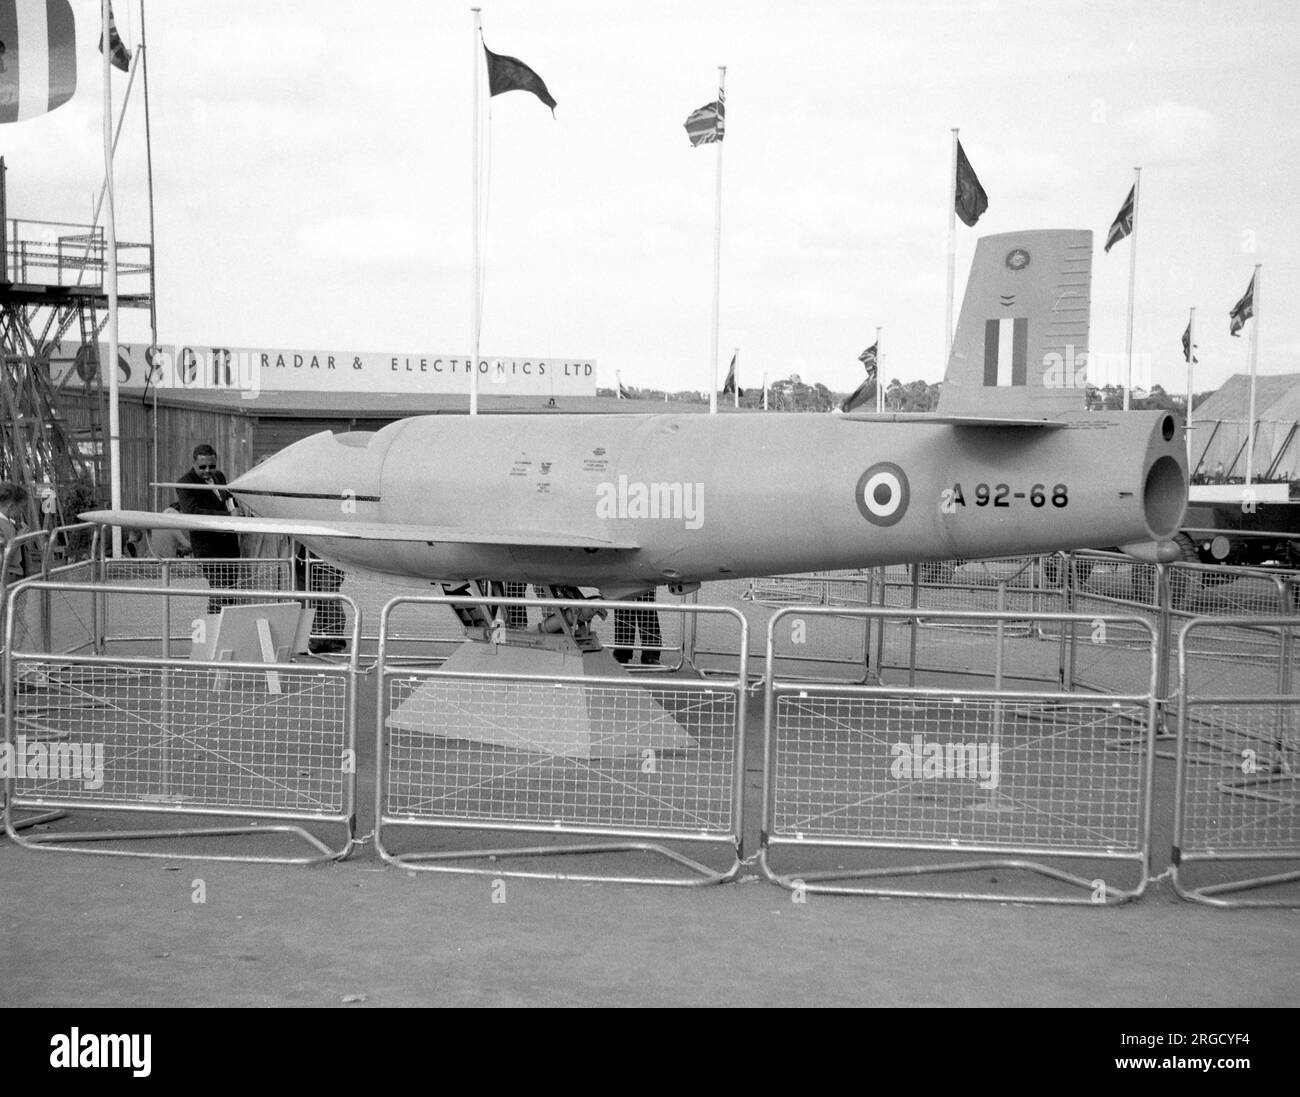 Royal Australian Air Force - Government Aircraft Factories Jindivik Mk.2 A92-68 (msn 48), at the SBAC Farnborough Air-show, held from 1-7 September 1958. This target drone was modified by Fairey in Hayes to Mk.103 standard for the RAF, as XN804, but believed to have been retained by Fairey as a reference aid. Stock Photo